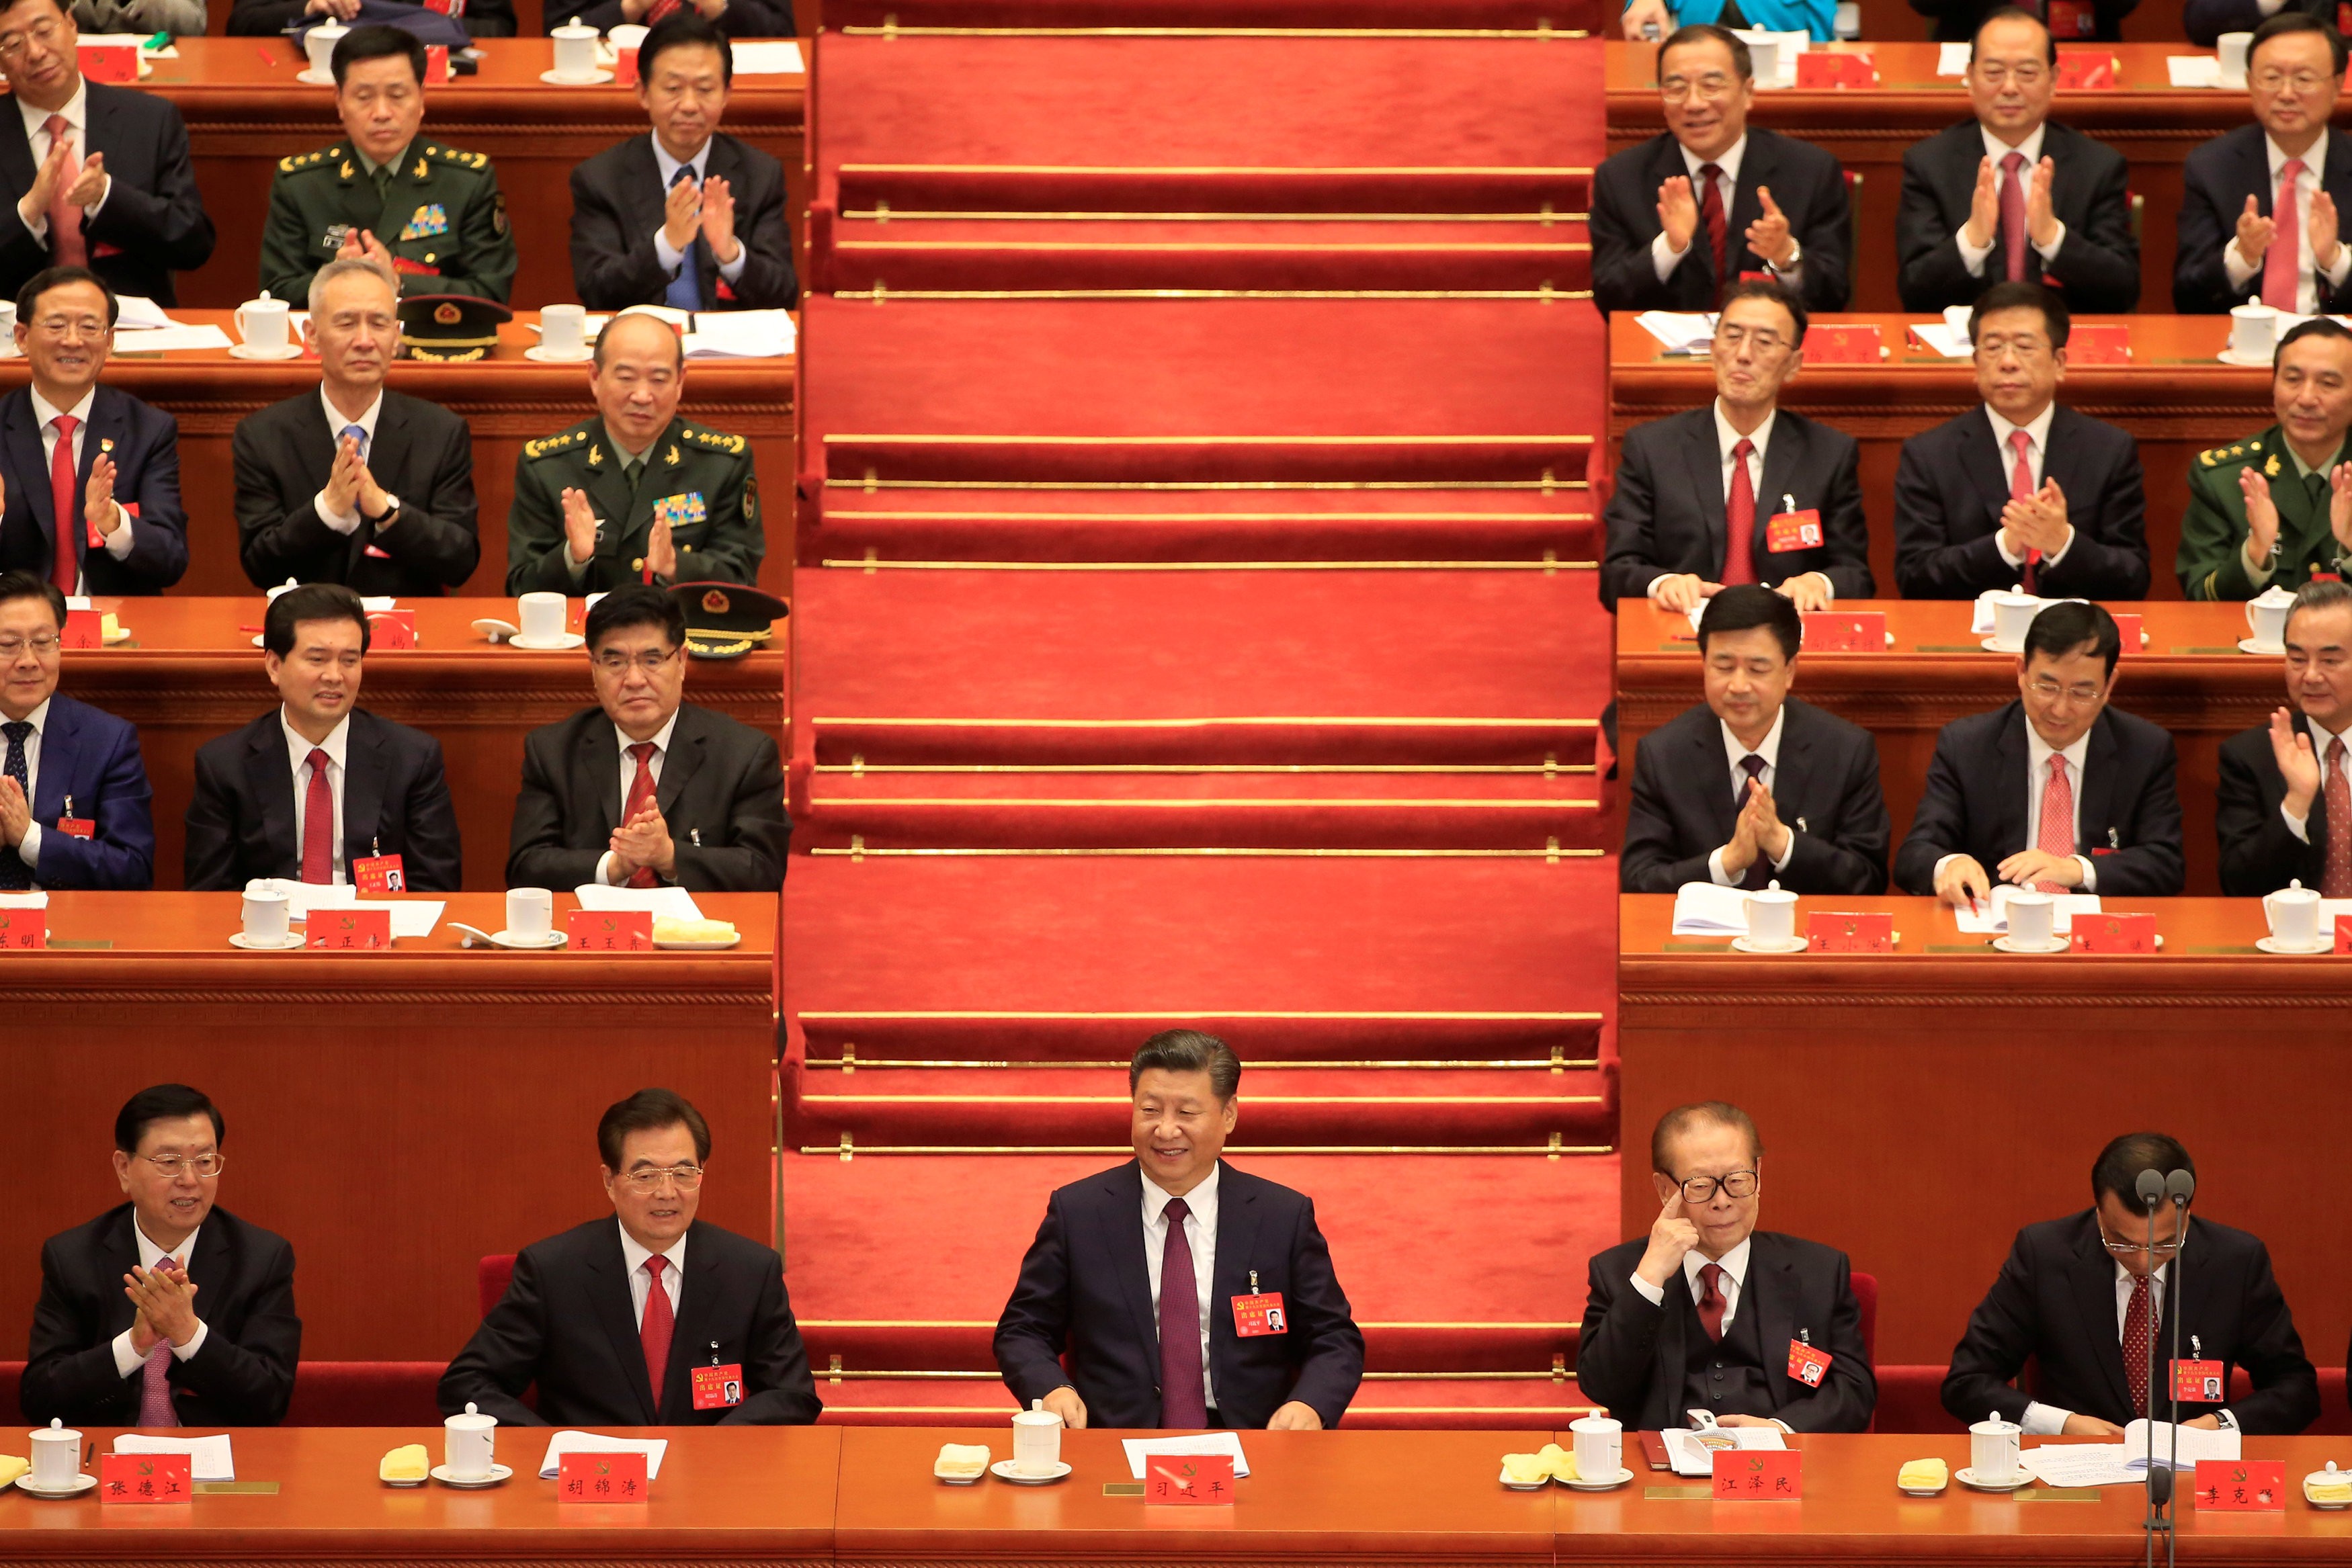 Chinese President Xi Jinping beside Chairman of the Standing Committee of the National People's Congress Zhang Dejiang, former Chinese President Hu Jintao, former President Jiang Zemin and Chinese Premier Li Keqiang during the opening of the 19th National Congress of the Communist Party of China at the Great Hall of the People in Beijing, China on October 18, 2017. Photo: Reuters